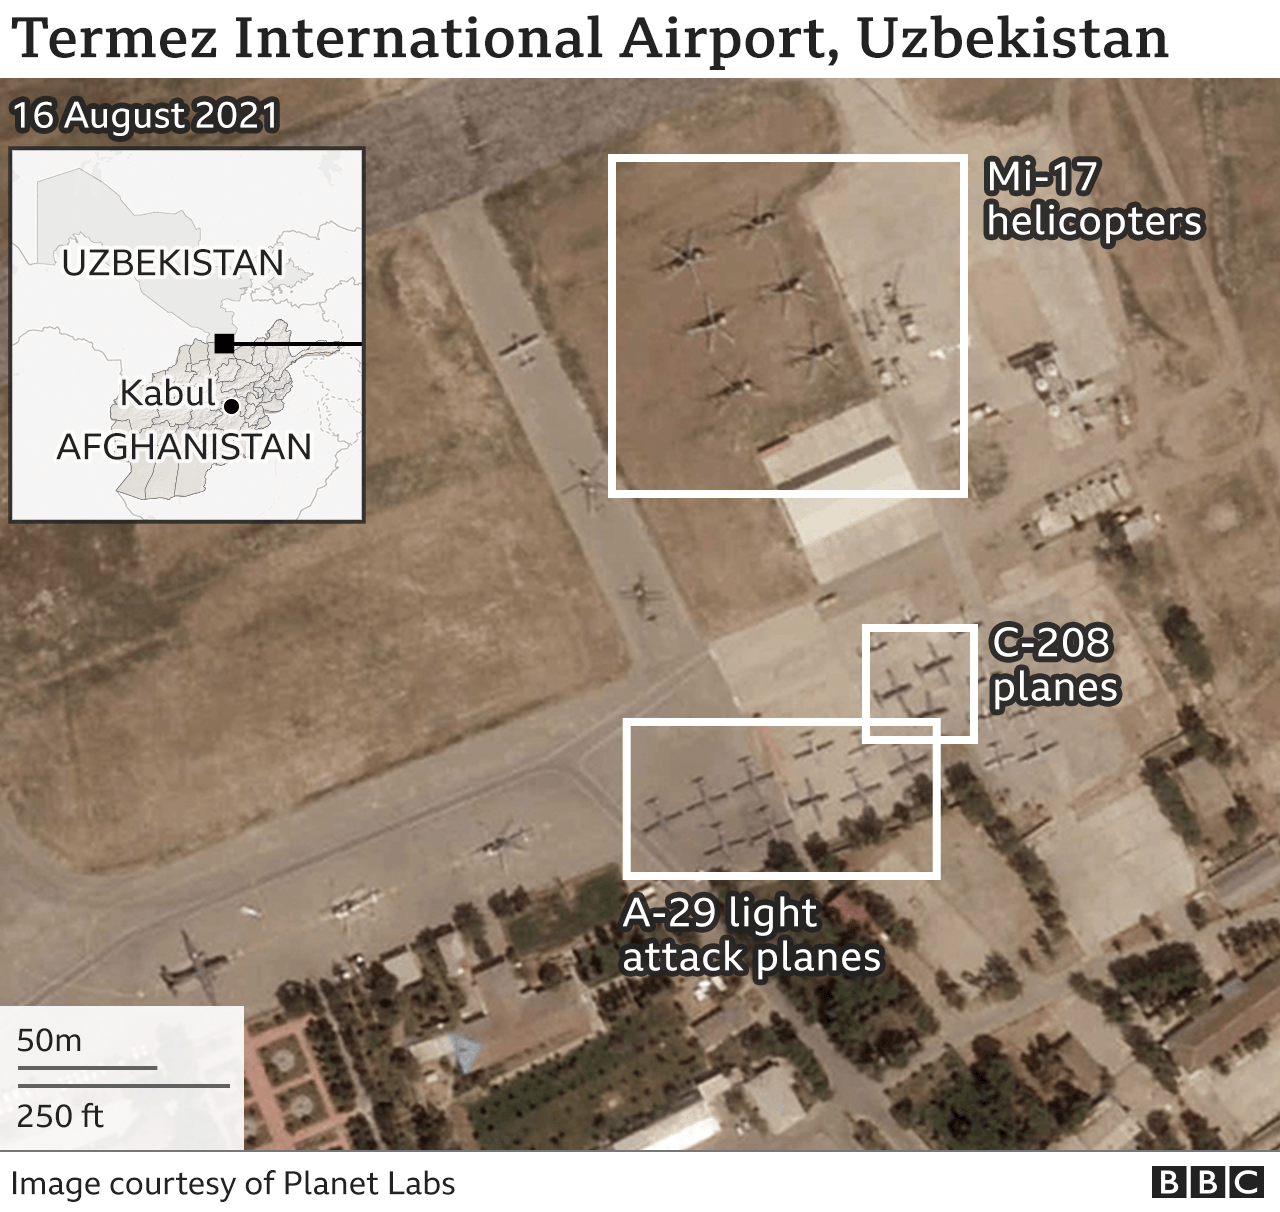 Satellite image of Termez International Airport with military aircraft on the ground.